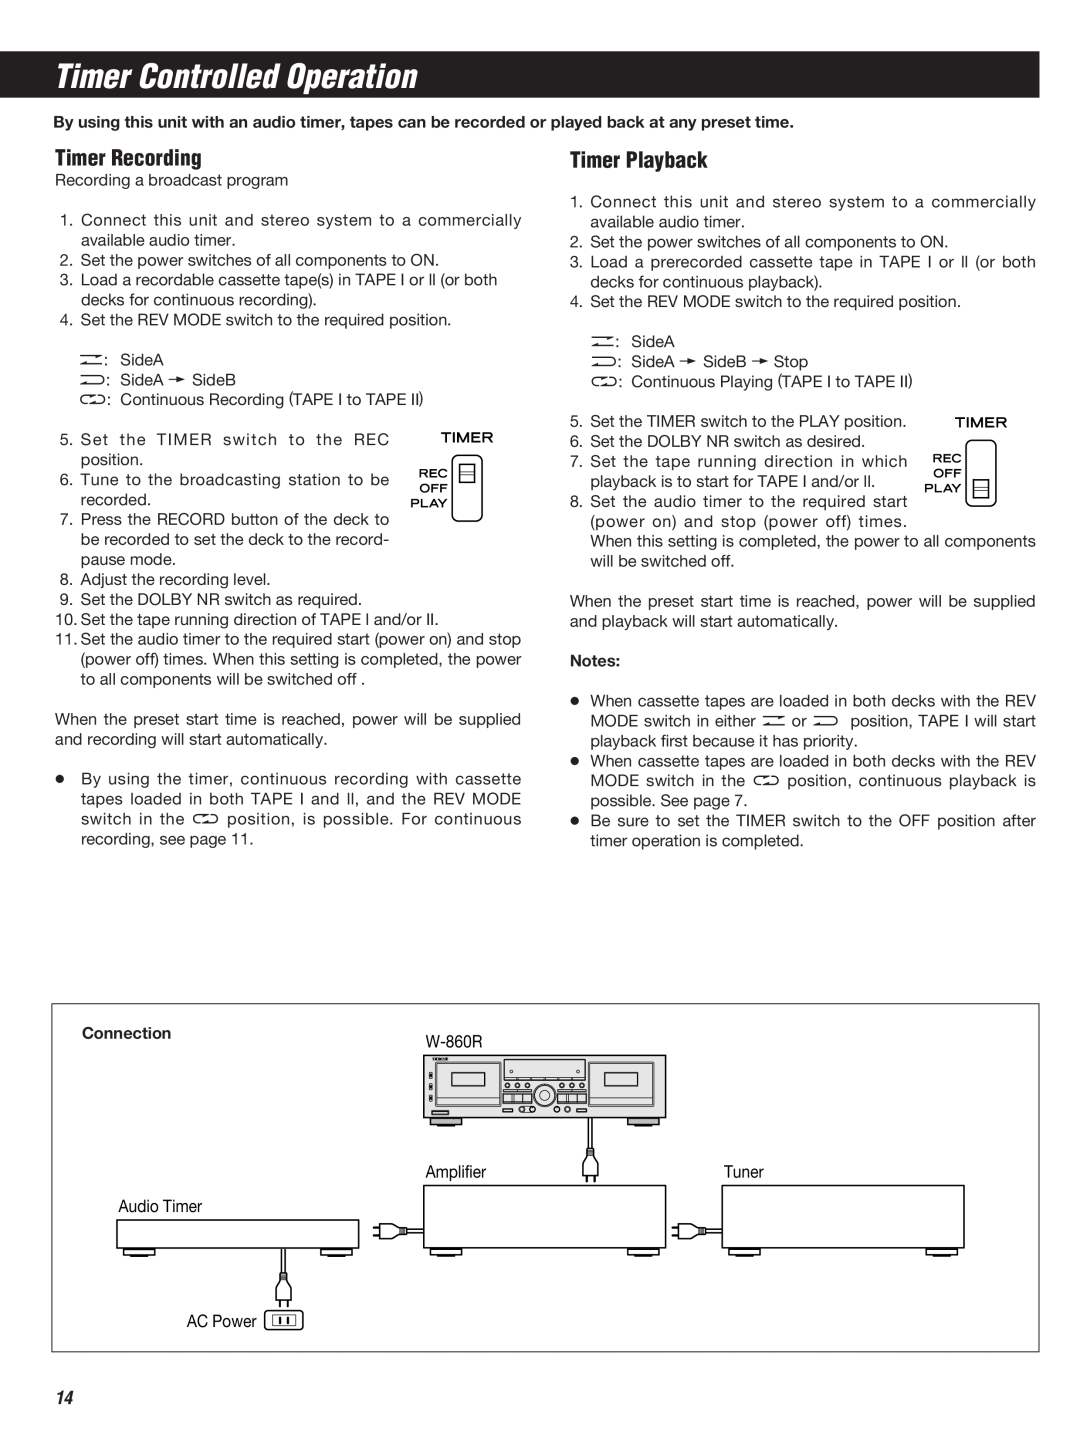 Teac W-860R owner manual Timer Controlled Operation, Timer Recording, Timer Playback 